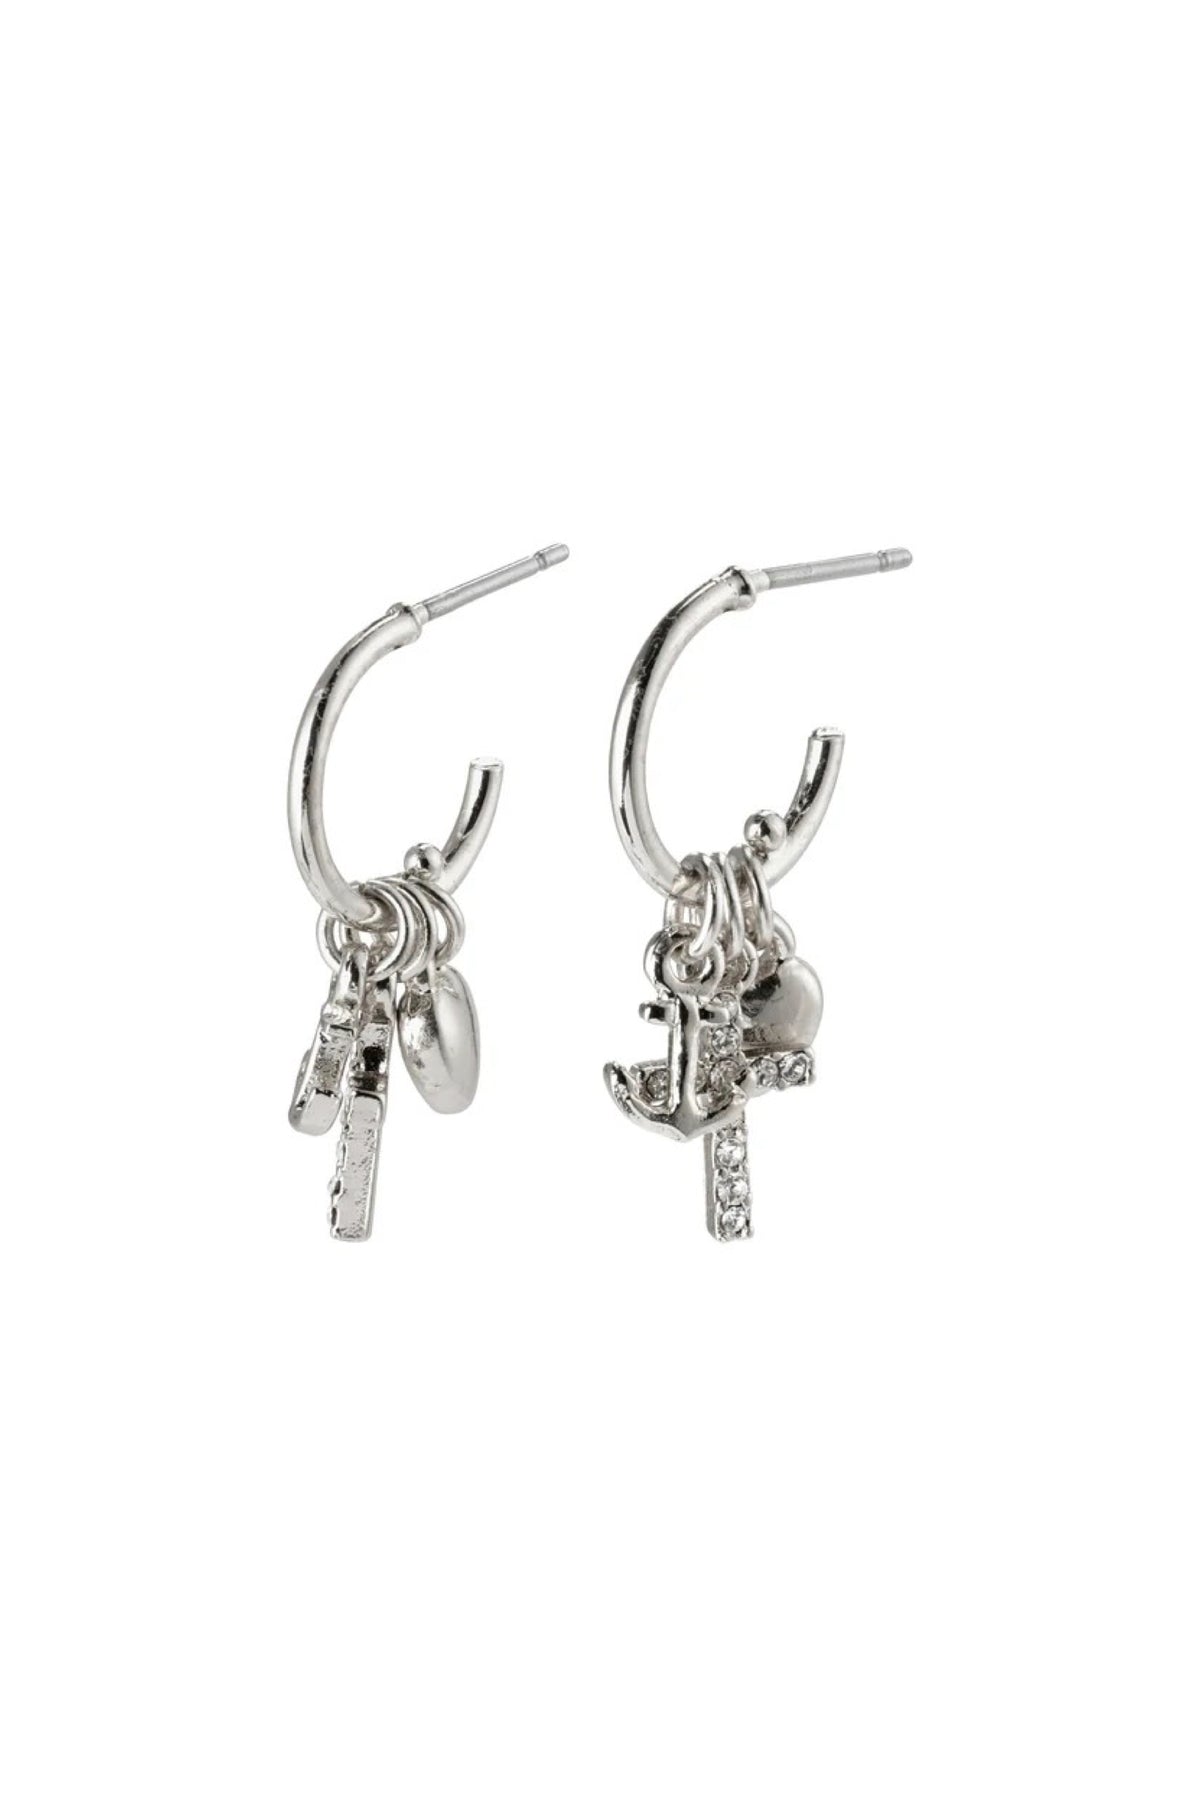 Anet Earrings - Silver Plated